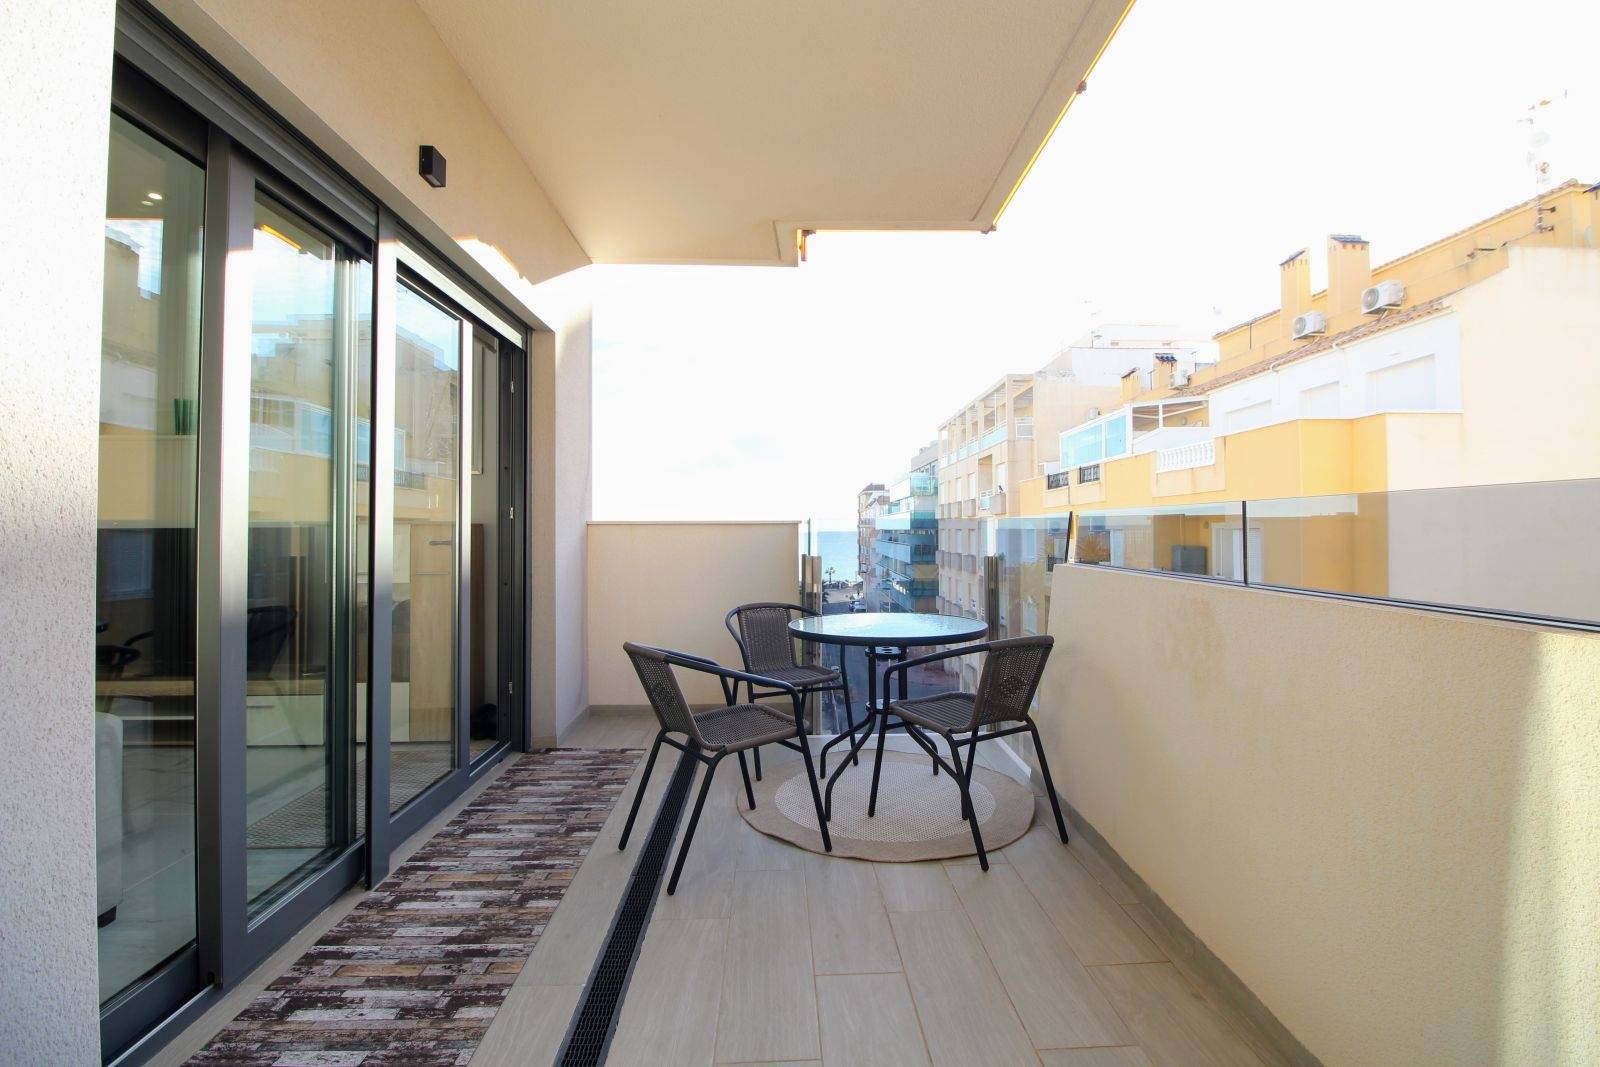 MODERN AND BRIGHT APARTMENT 350 METERS FROM THE BEACHES